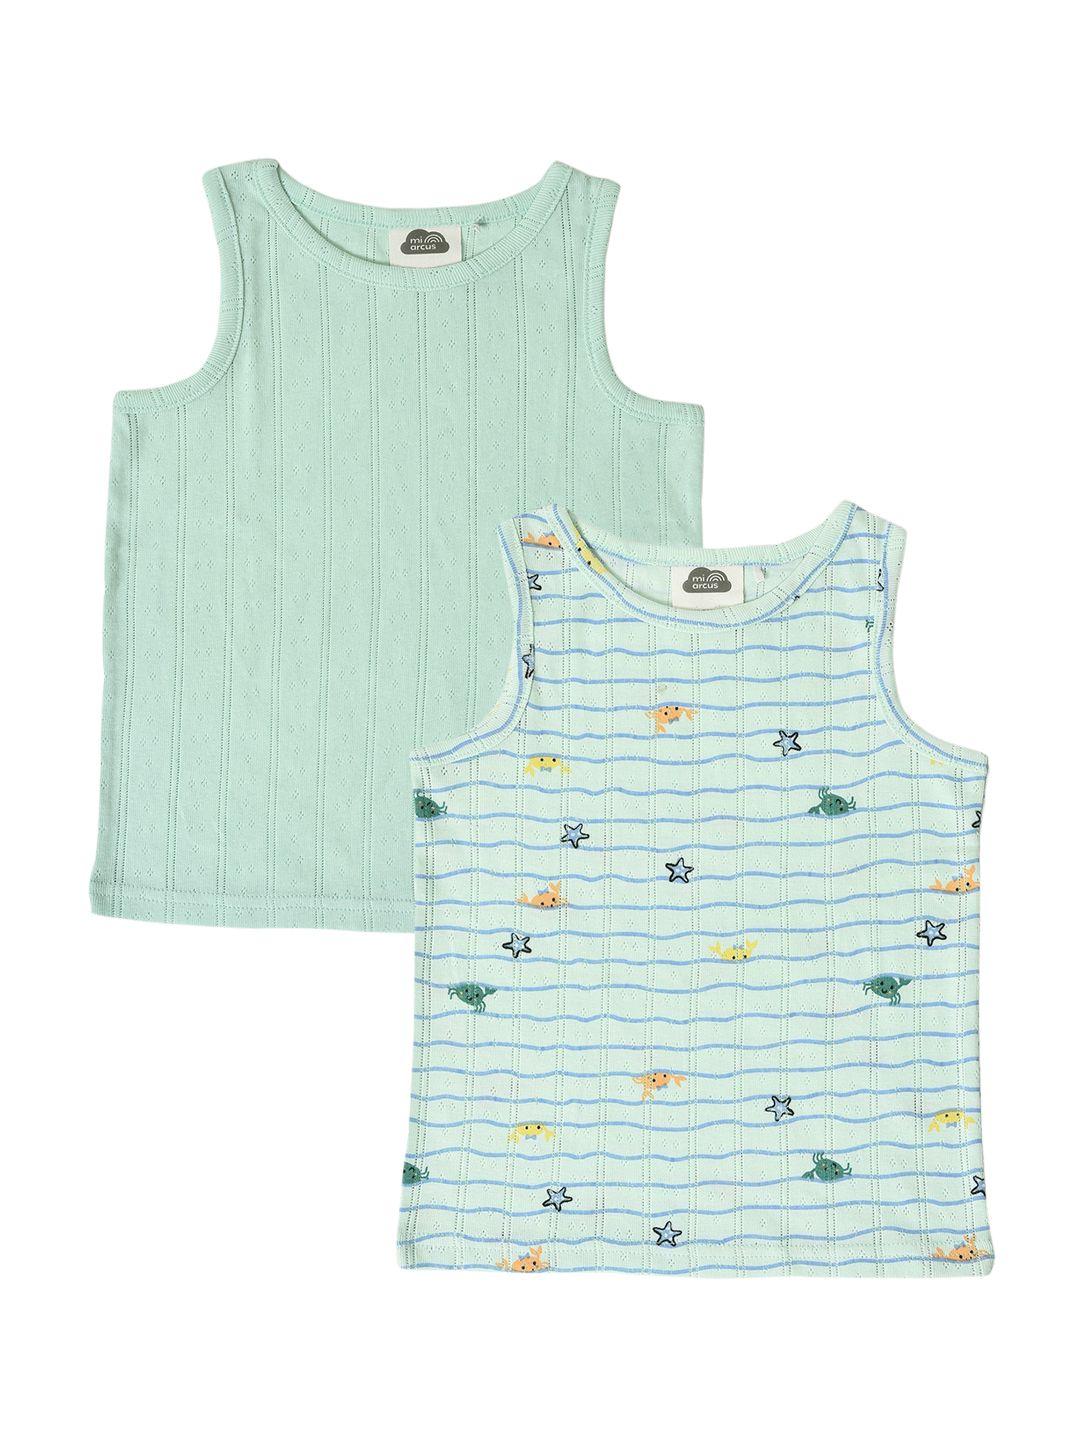 miarcus infant pack of 2 sea world printed cotton innerwear vests